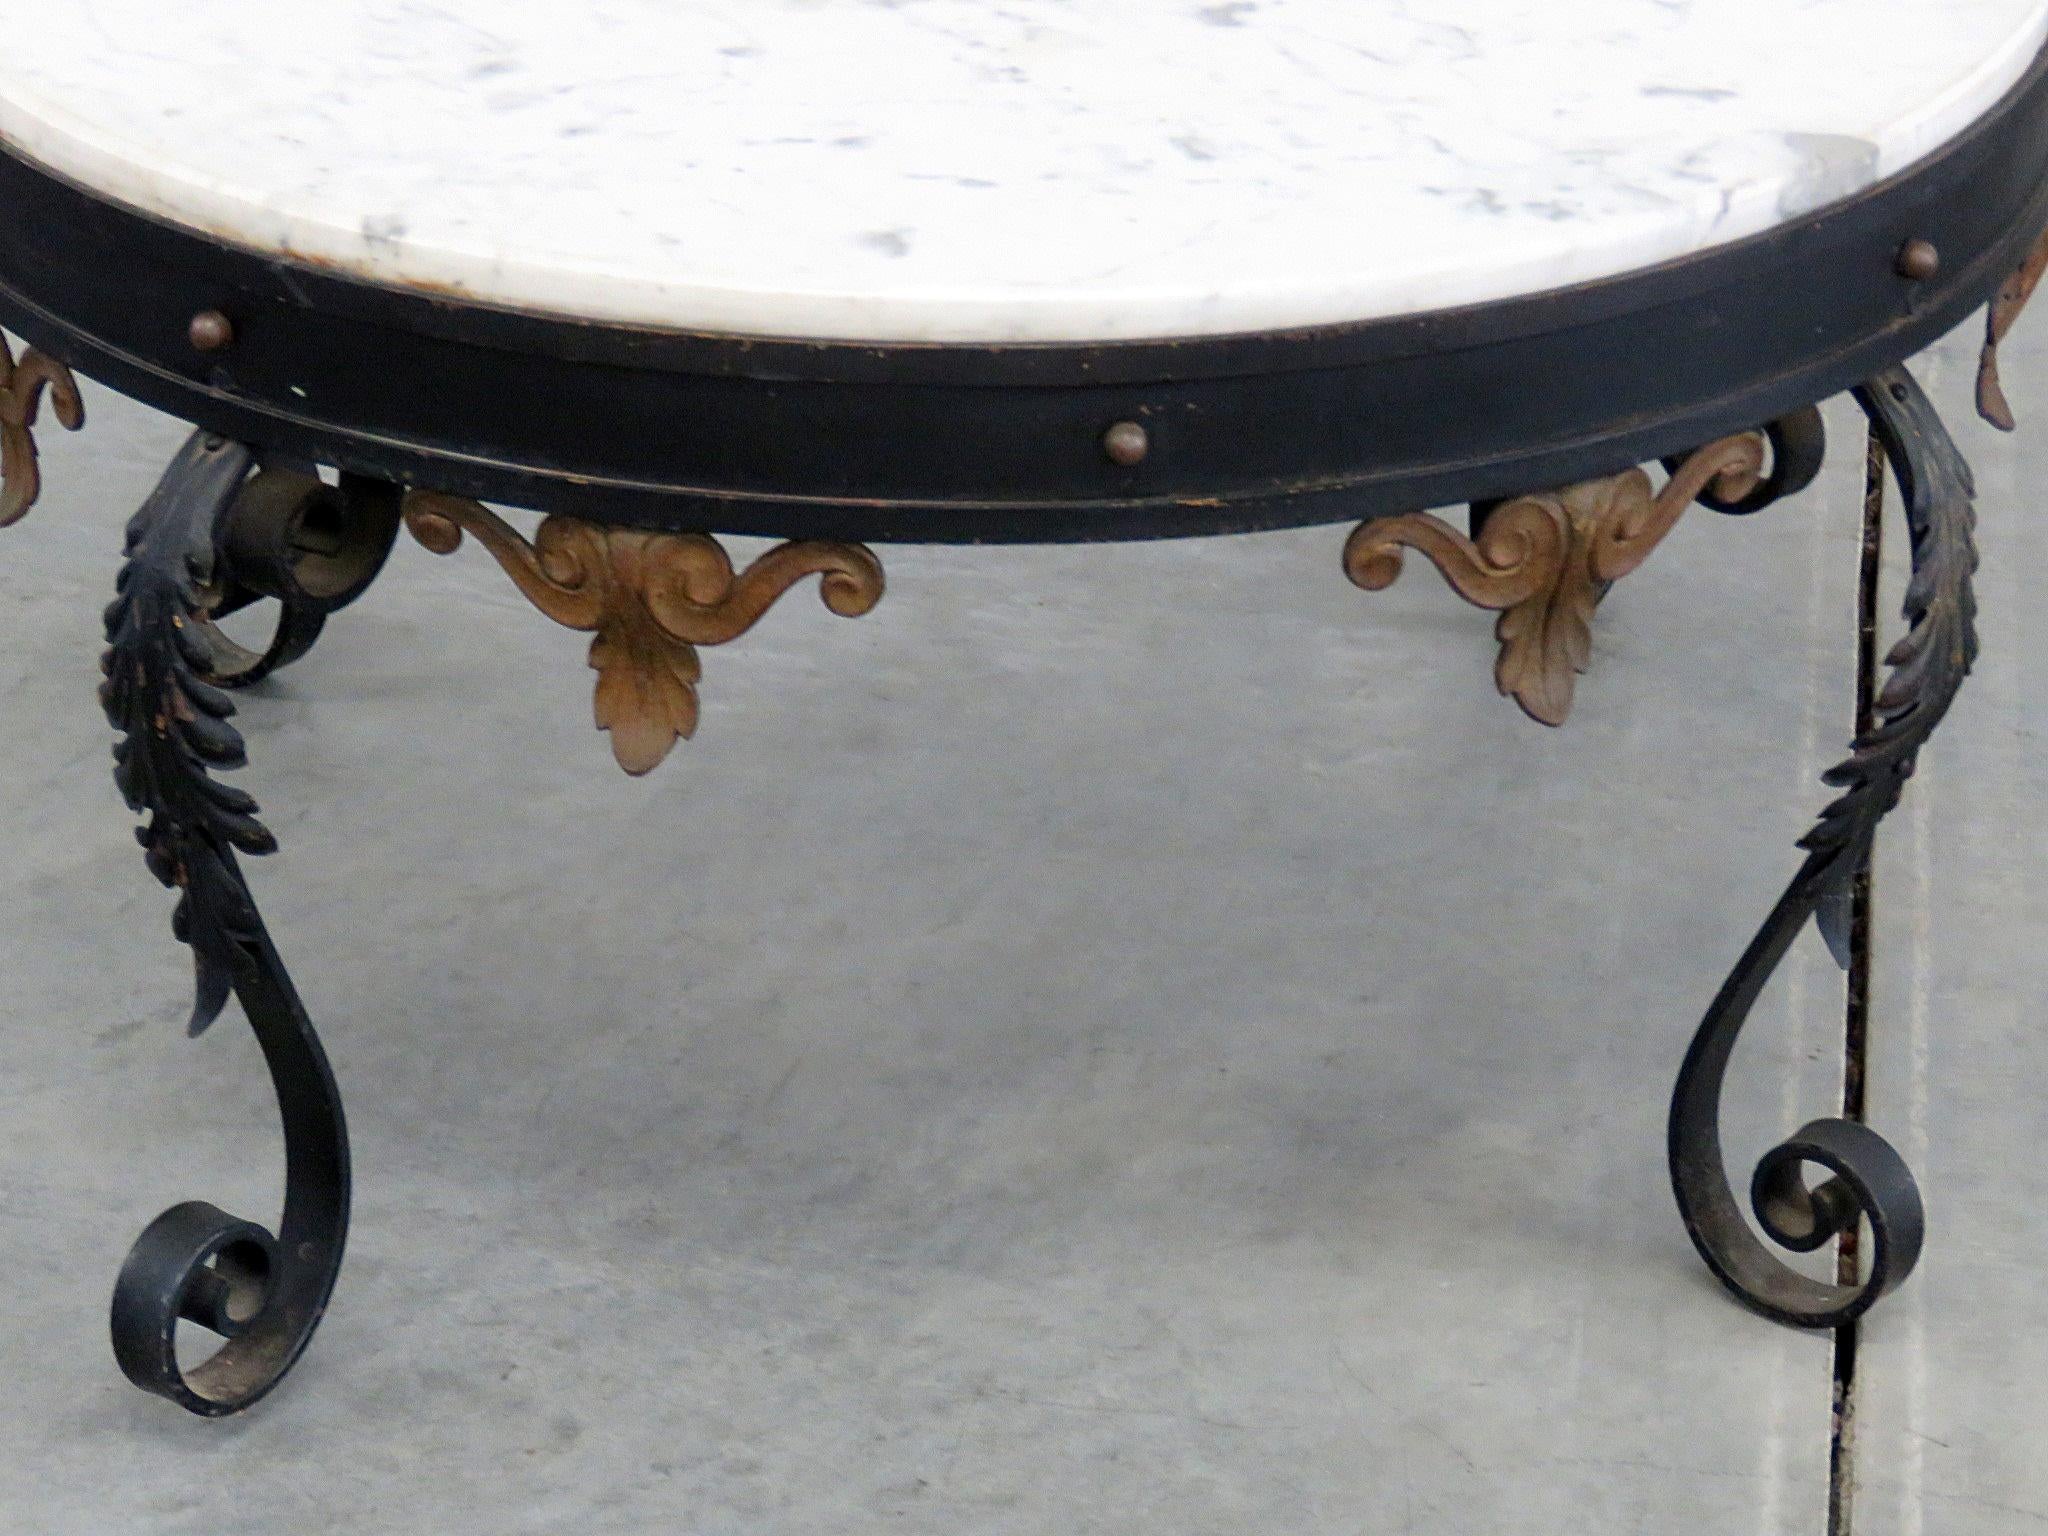 Regency style marble-top coffee table on a wrought iron base.